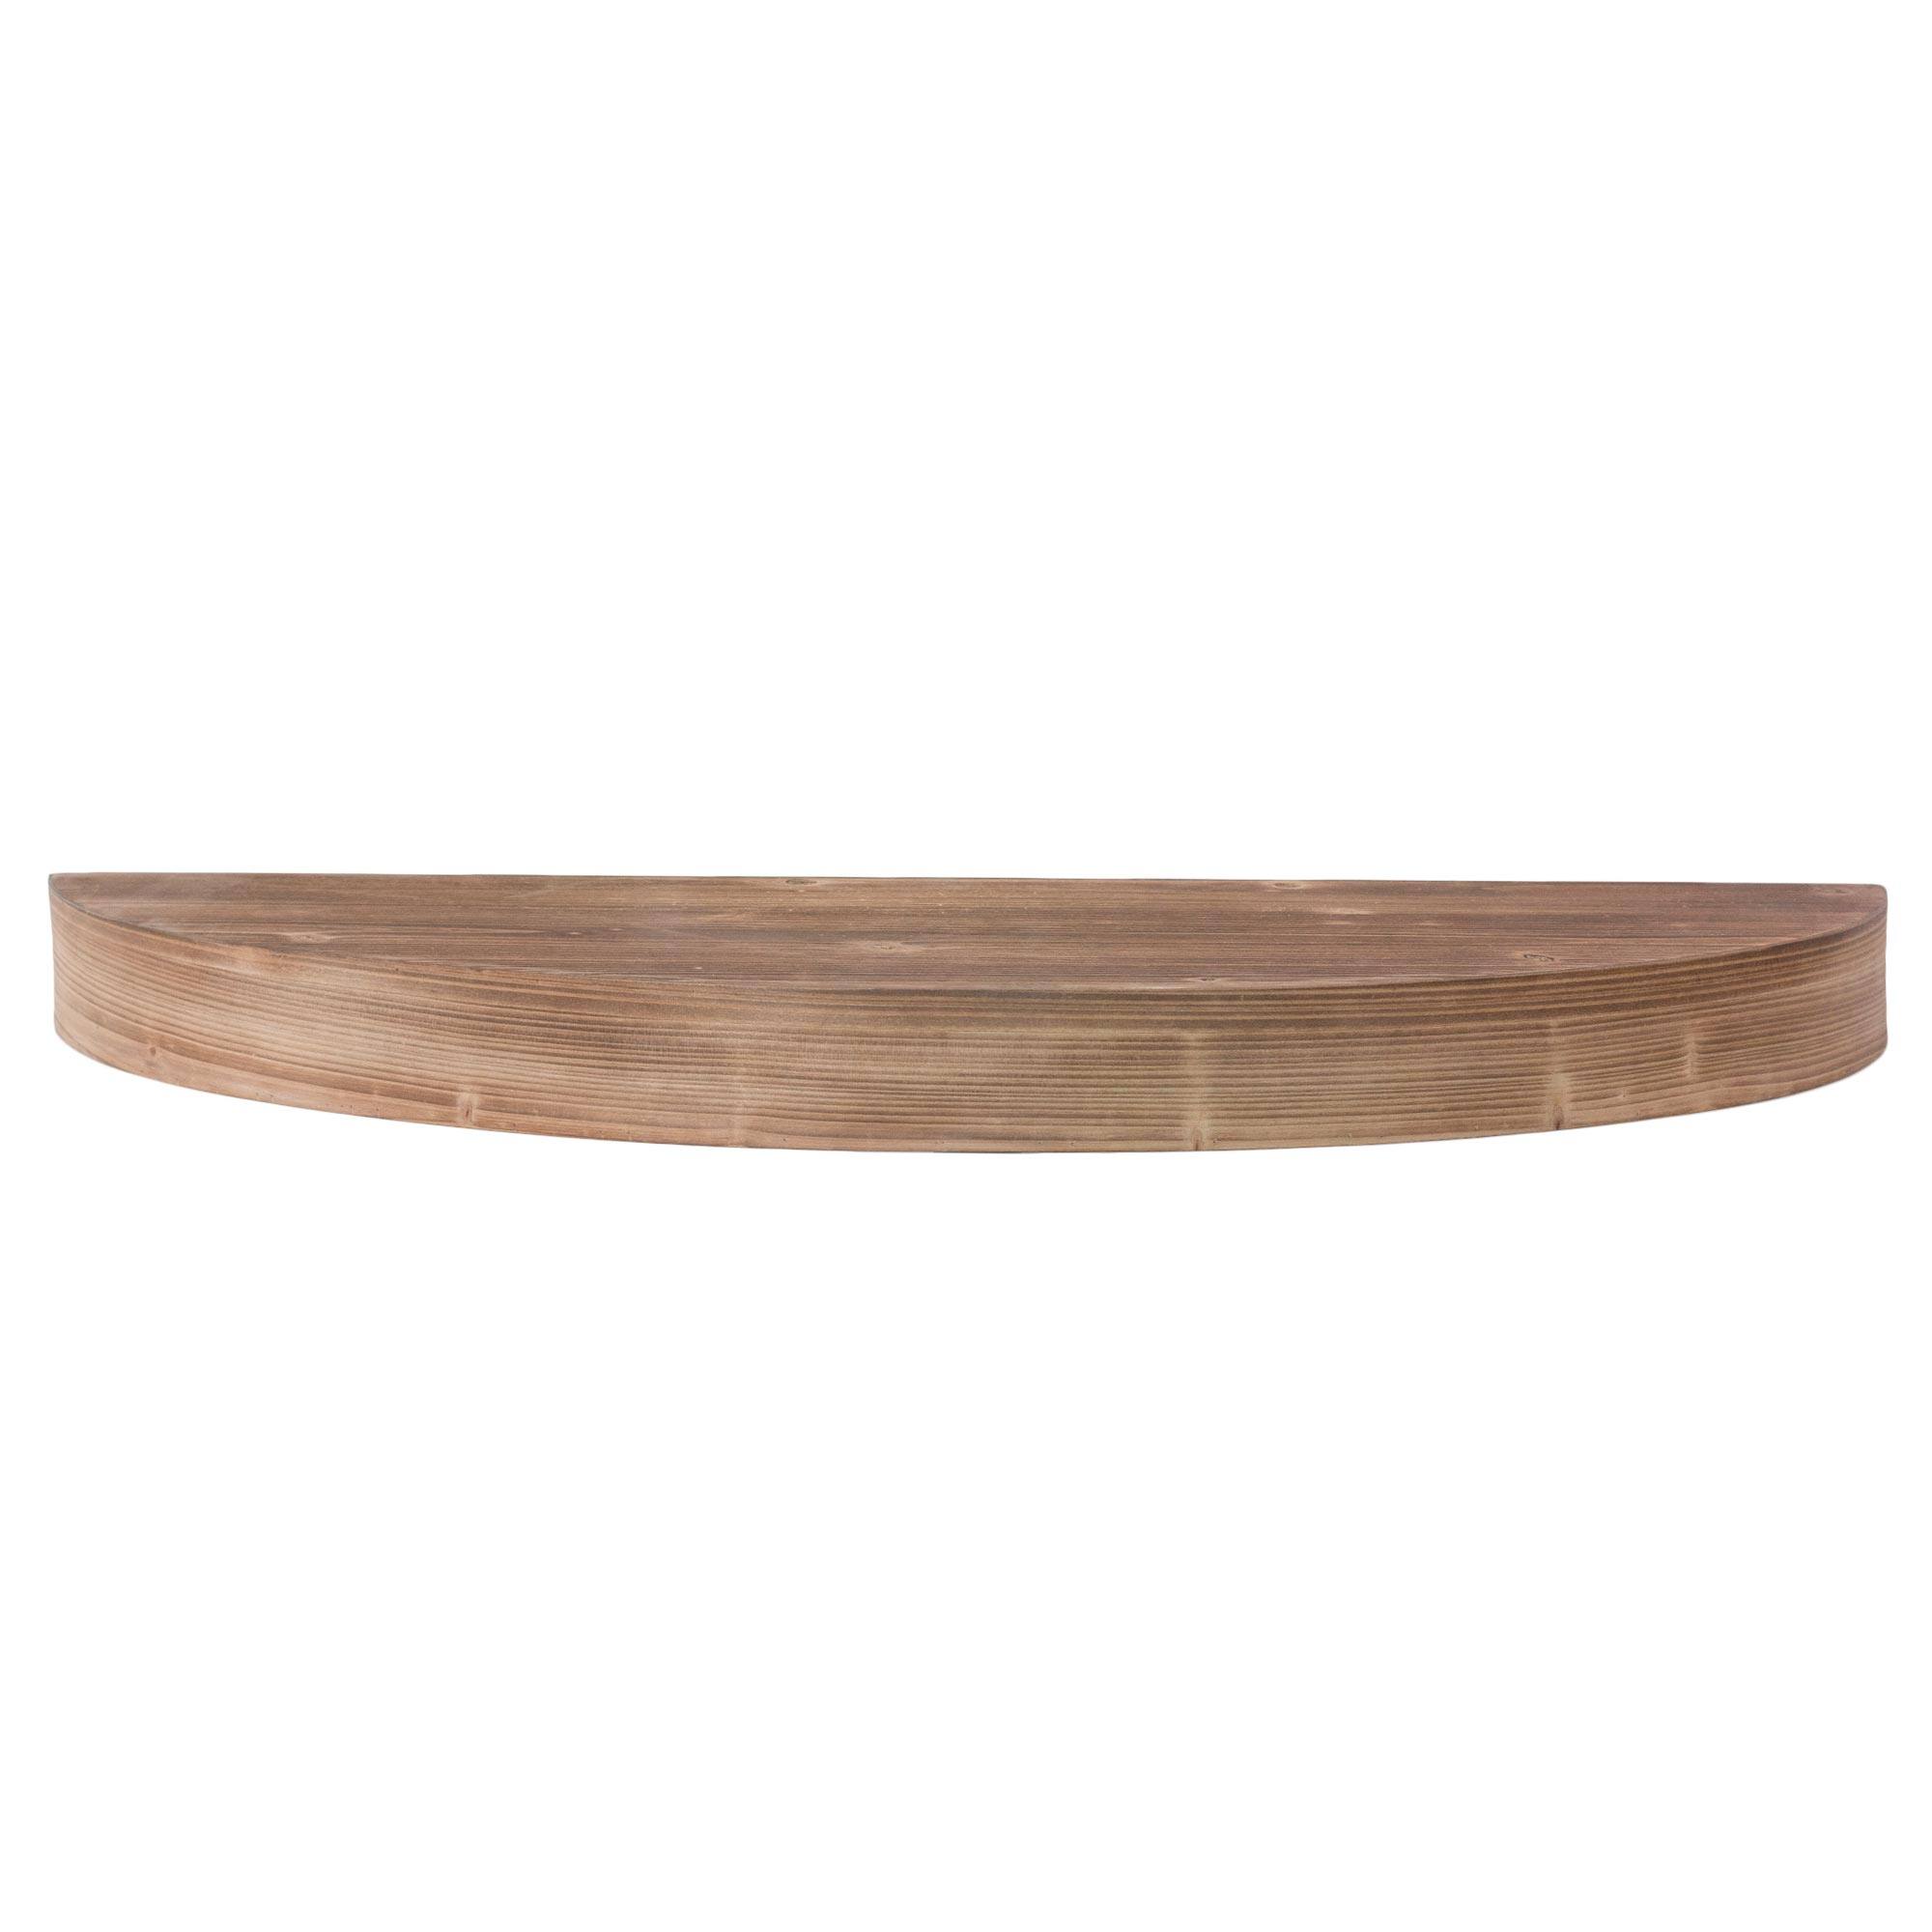 Large Brown Round Wood Floating Wall Shelf